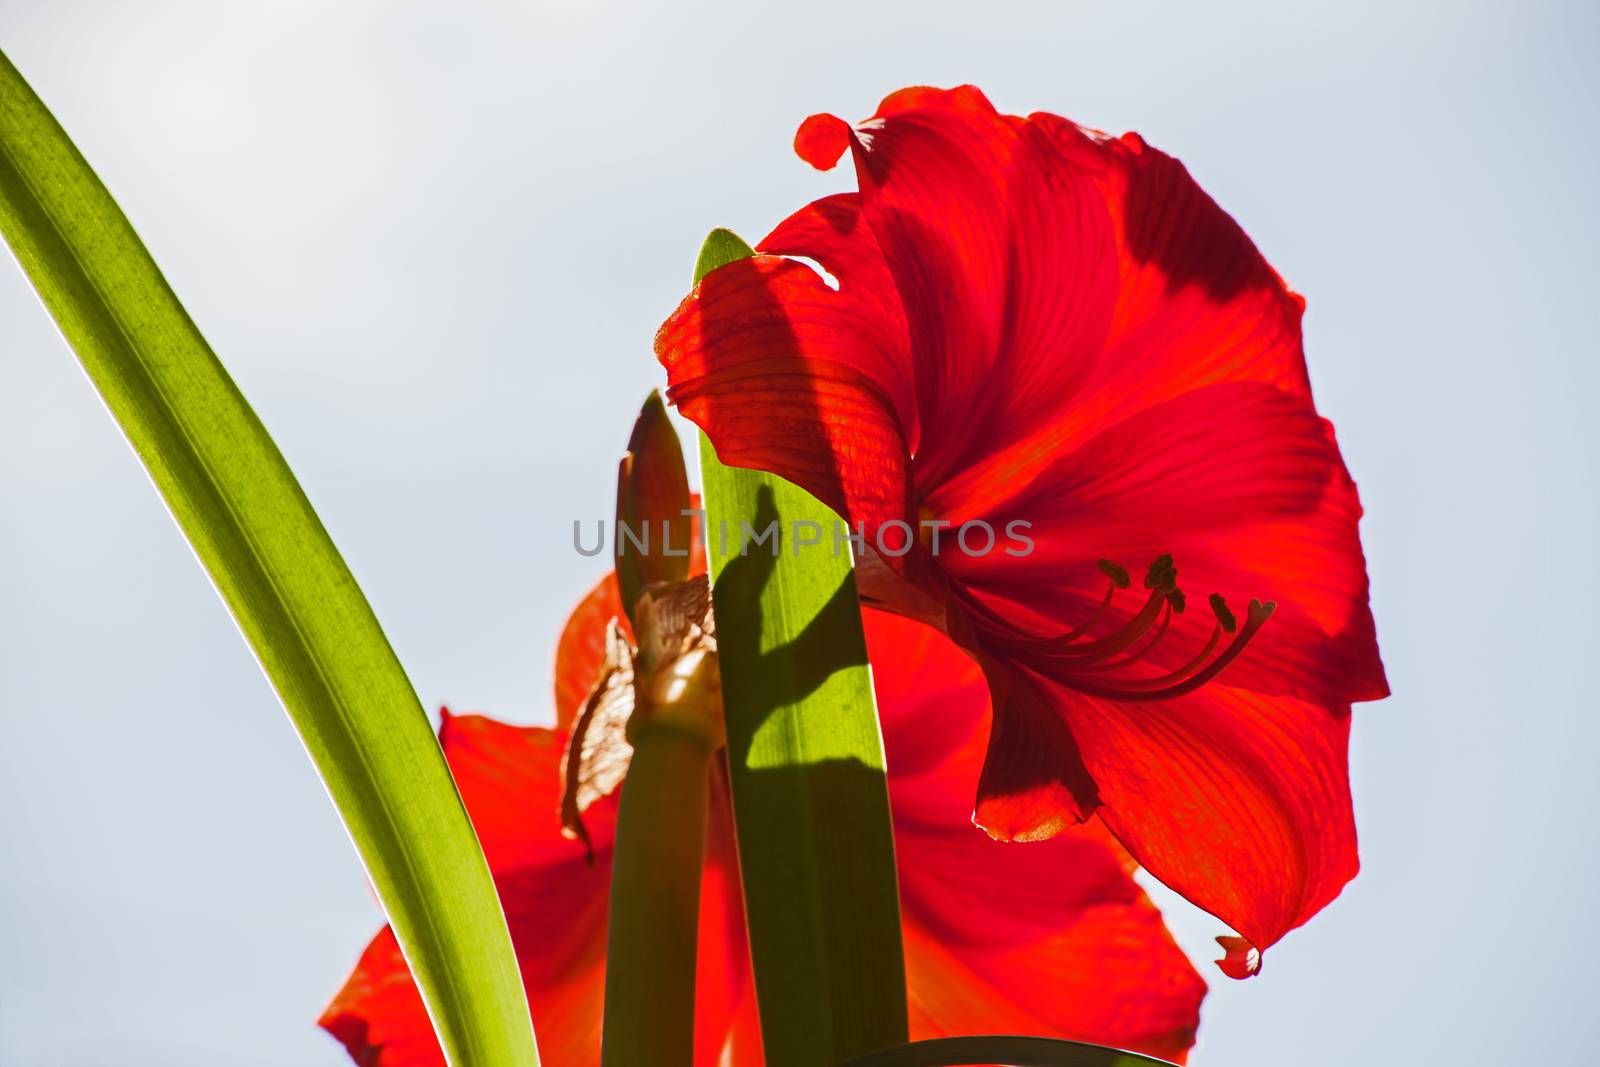 Red Amaryllis flower against blue sky by kobus_peche